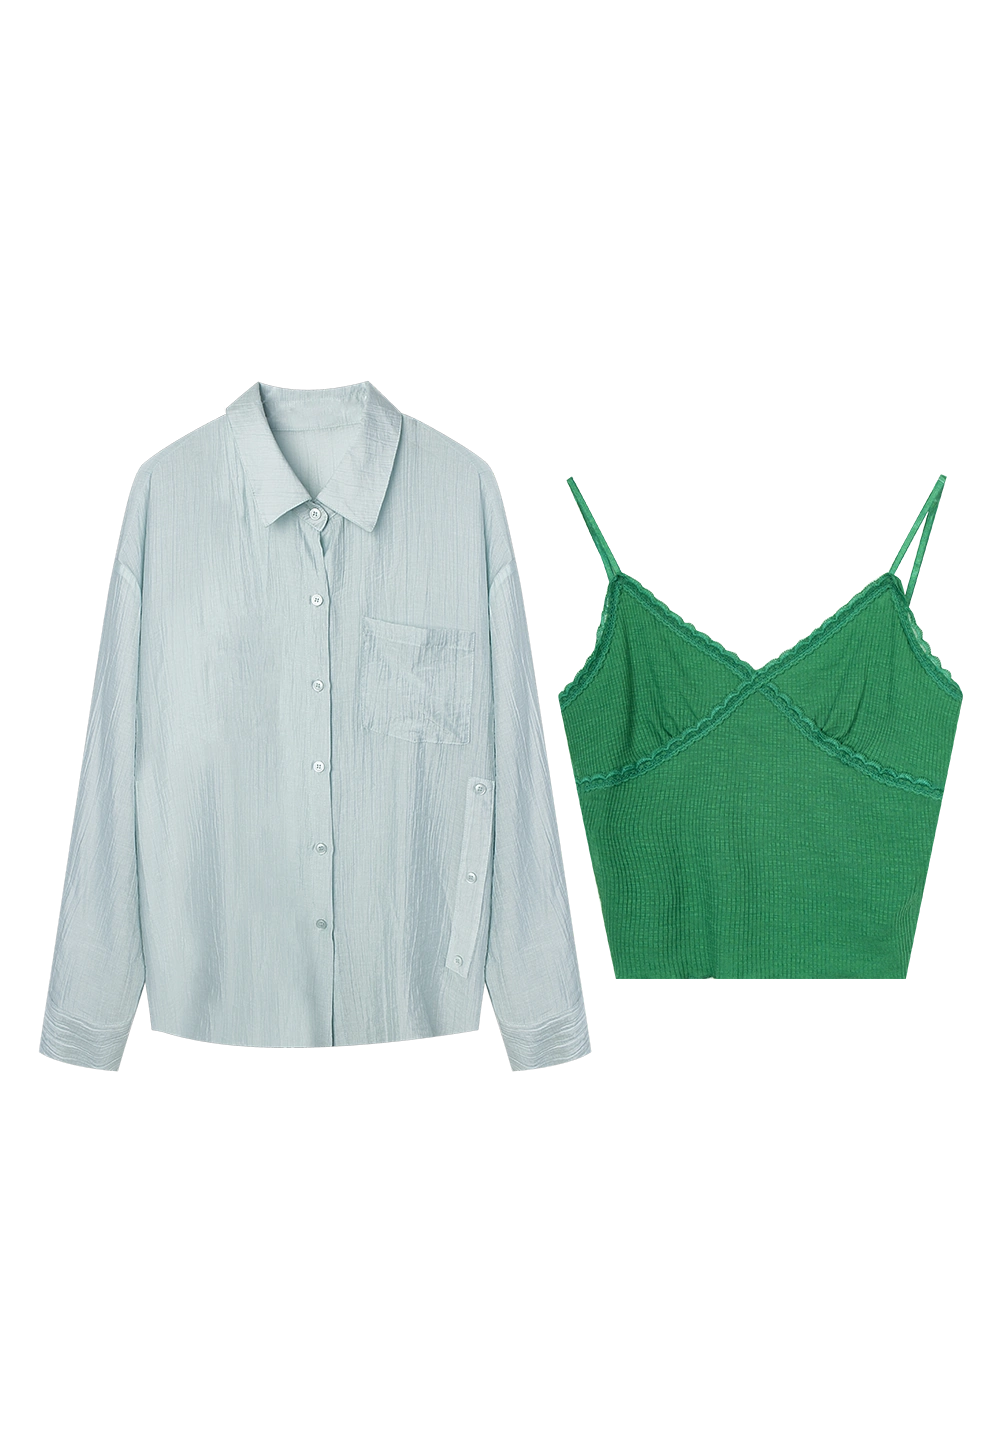 Women's Two-Piece Set: Elegant Button-Up Shirt and Camisole Top Combo